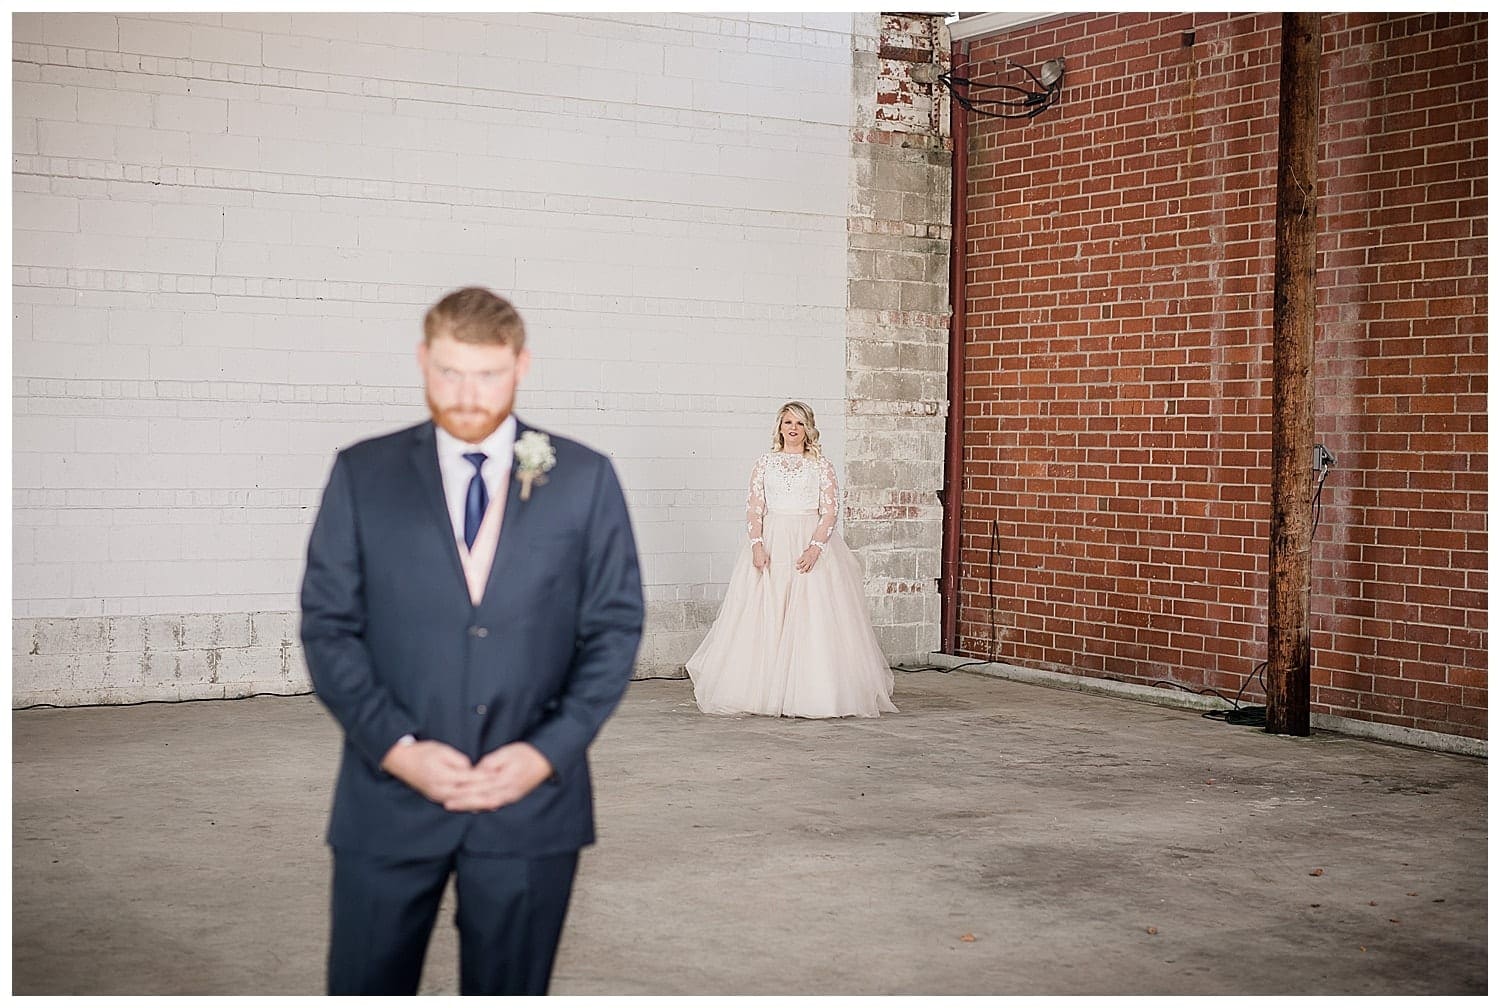 Photo of bride standing a few feet behind groom awaiting their first look of one another on their wedding day